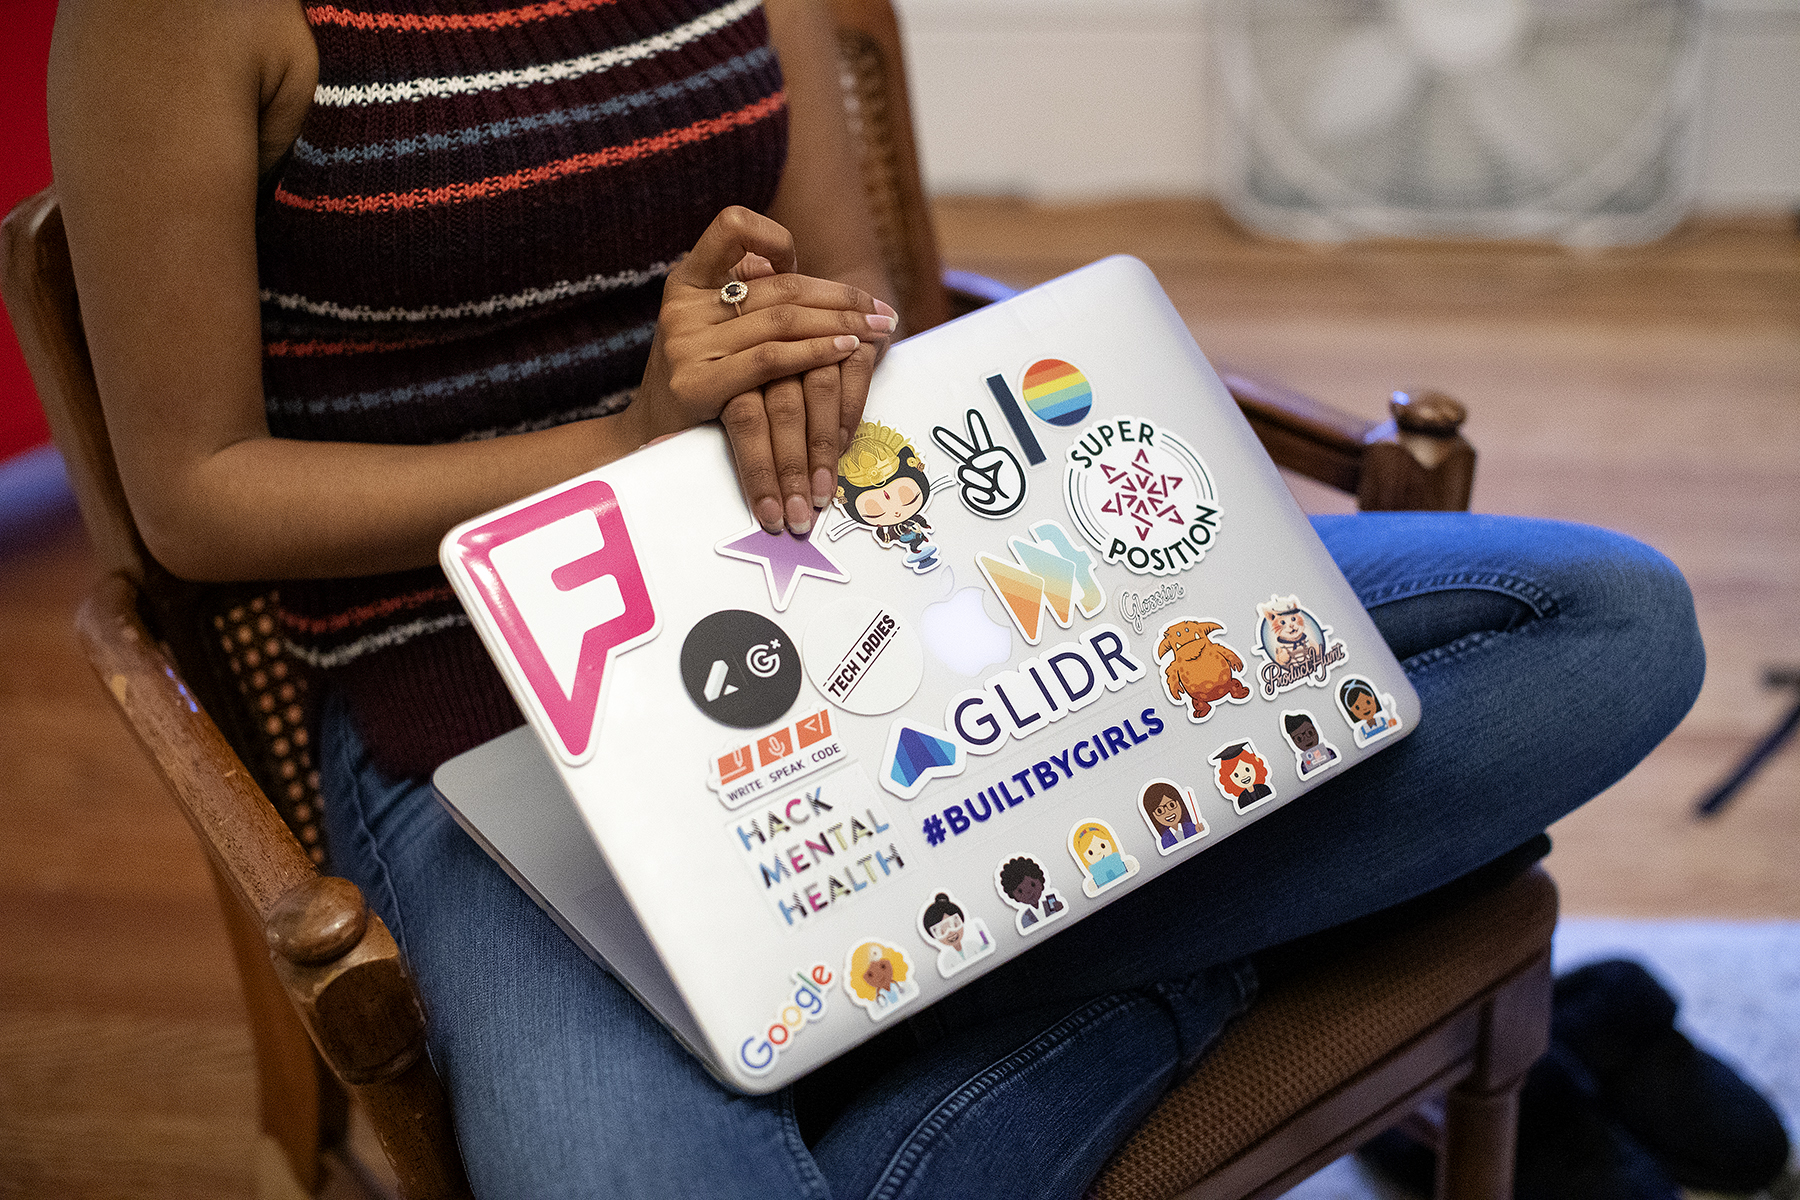 Shirya Nevatia's laptop is seen during the last meeting of the summer cohort of the Violet Society at Shirya Nevatia's home in San Francisco, Calif., on Wednesday, August 22, 2018. Described as a {quote}startup sisterhood for future founders,{quote} the group met weekly for 12-weeks to help mentor each other. This summer group was the first cohort of the organization. CONTACT:Shriya NevatiaSneva831@gmail.com518-338-8505Michelle Galemmo mgalemmo@gmail.com267-866-7366Grace HuGracehu532@gmail.com650-773-6195Marie HepferMarie.hepfer@gmail.com616-443-3443Nicole GarciaNicole@femkit.com925-818-7841Lucille ZhaoLucille.zhao@gmail.com312-866-7366Giselle Vasquez gissibrand@gmail.com787-366-4967